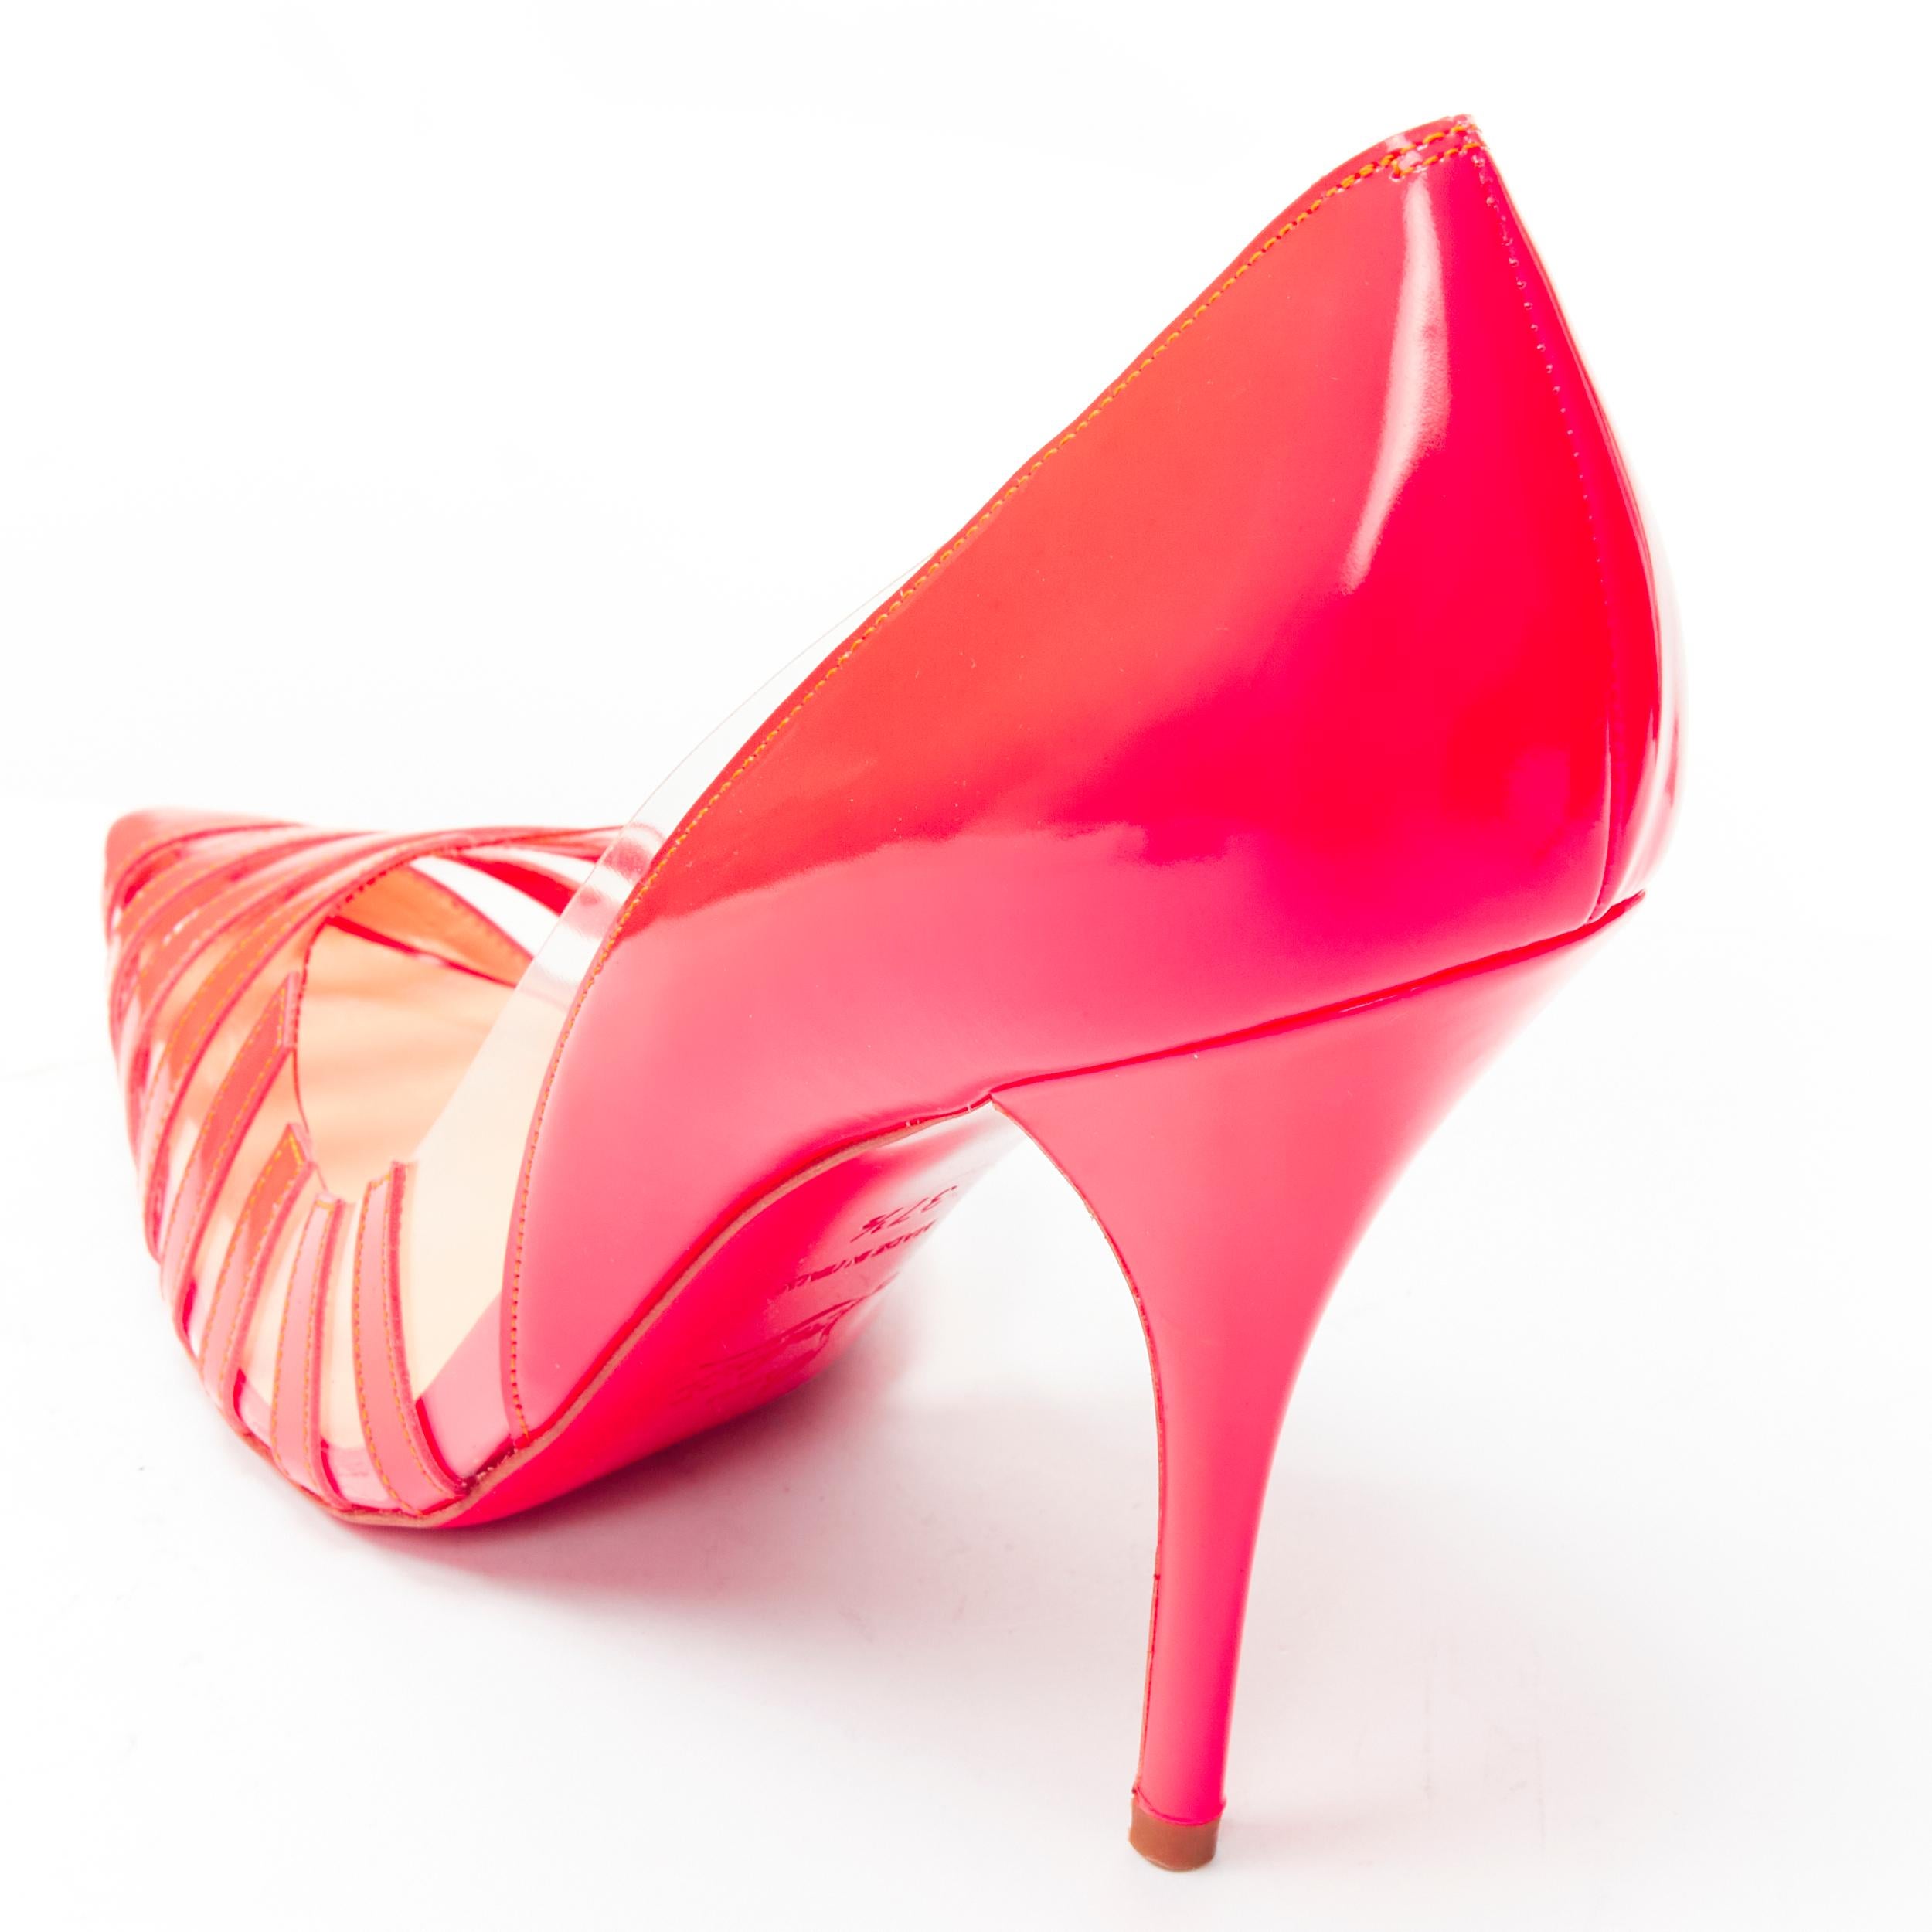 CHRISTIAN LOUBOUTIN Pivichic 100 neon pink striped patent pigalle pump EU37.5 For Sale 3